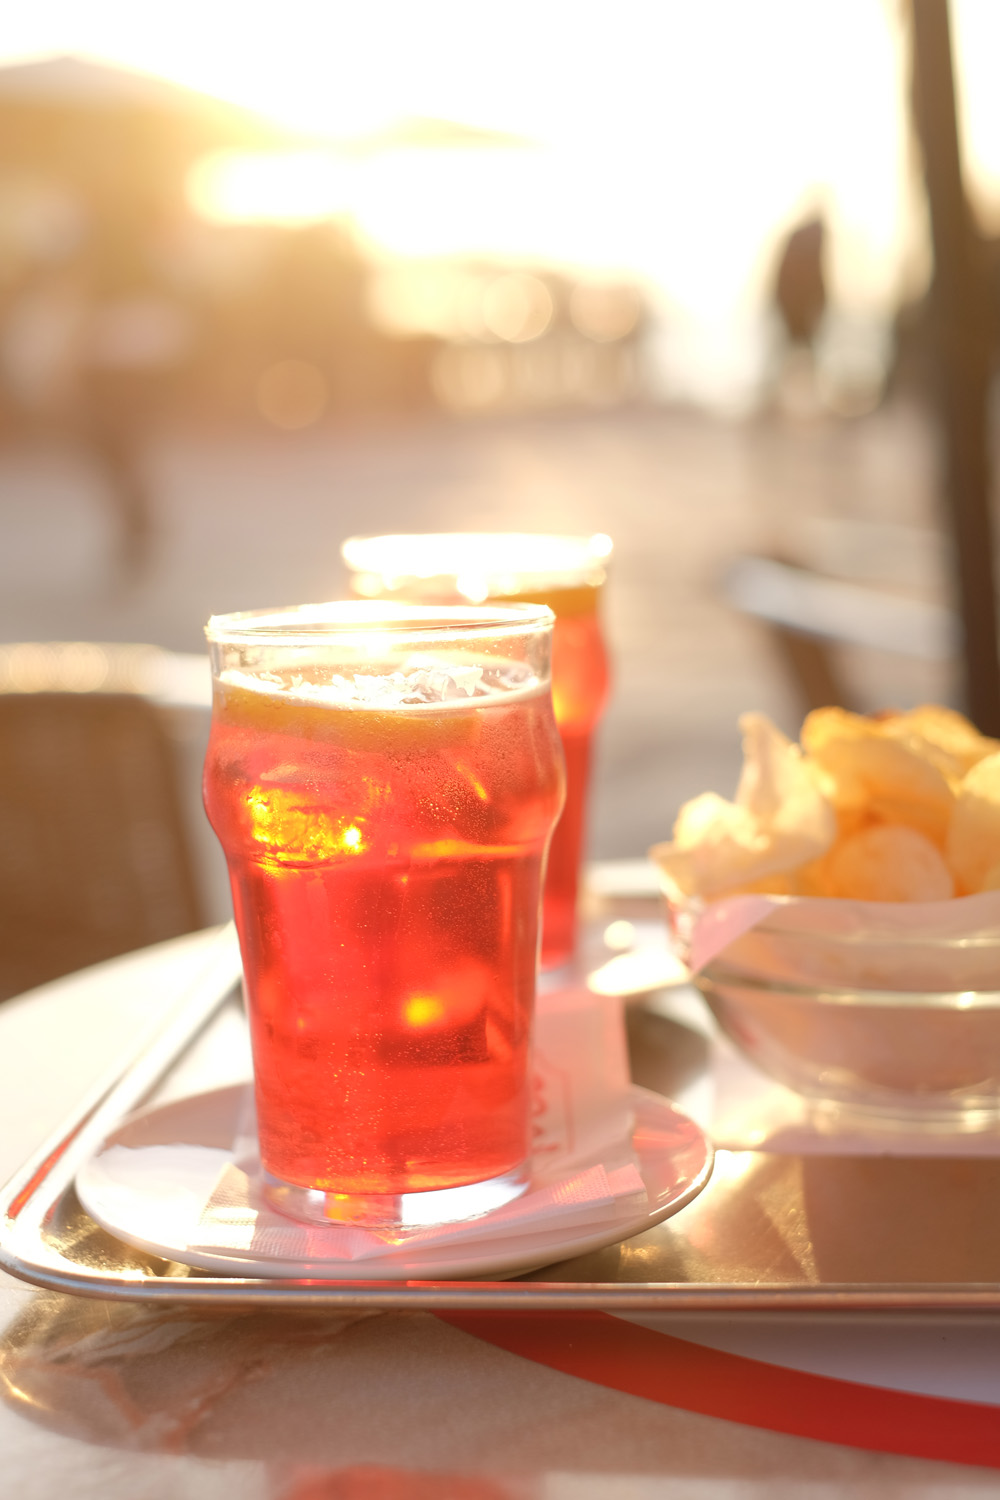 A sunset aperitivo on Dorsoduro, Campari spritz and crisps. Travel and food photography by Kent Johnson.